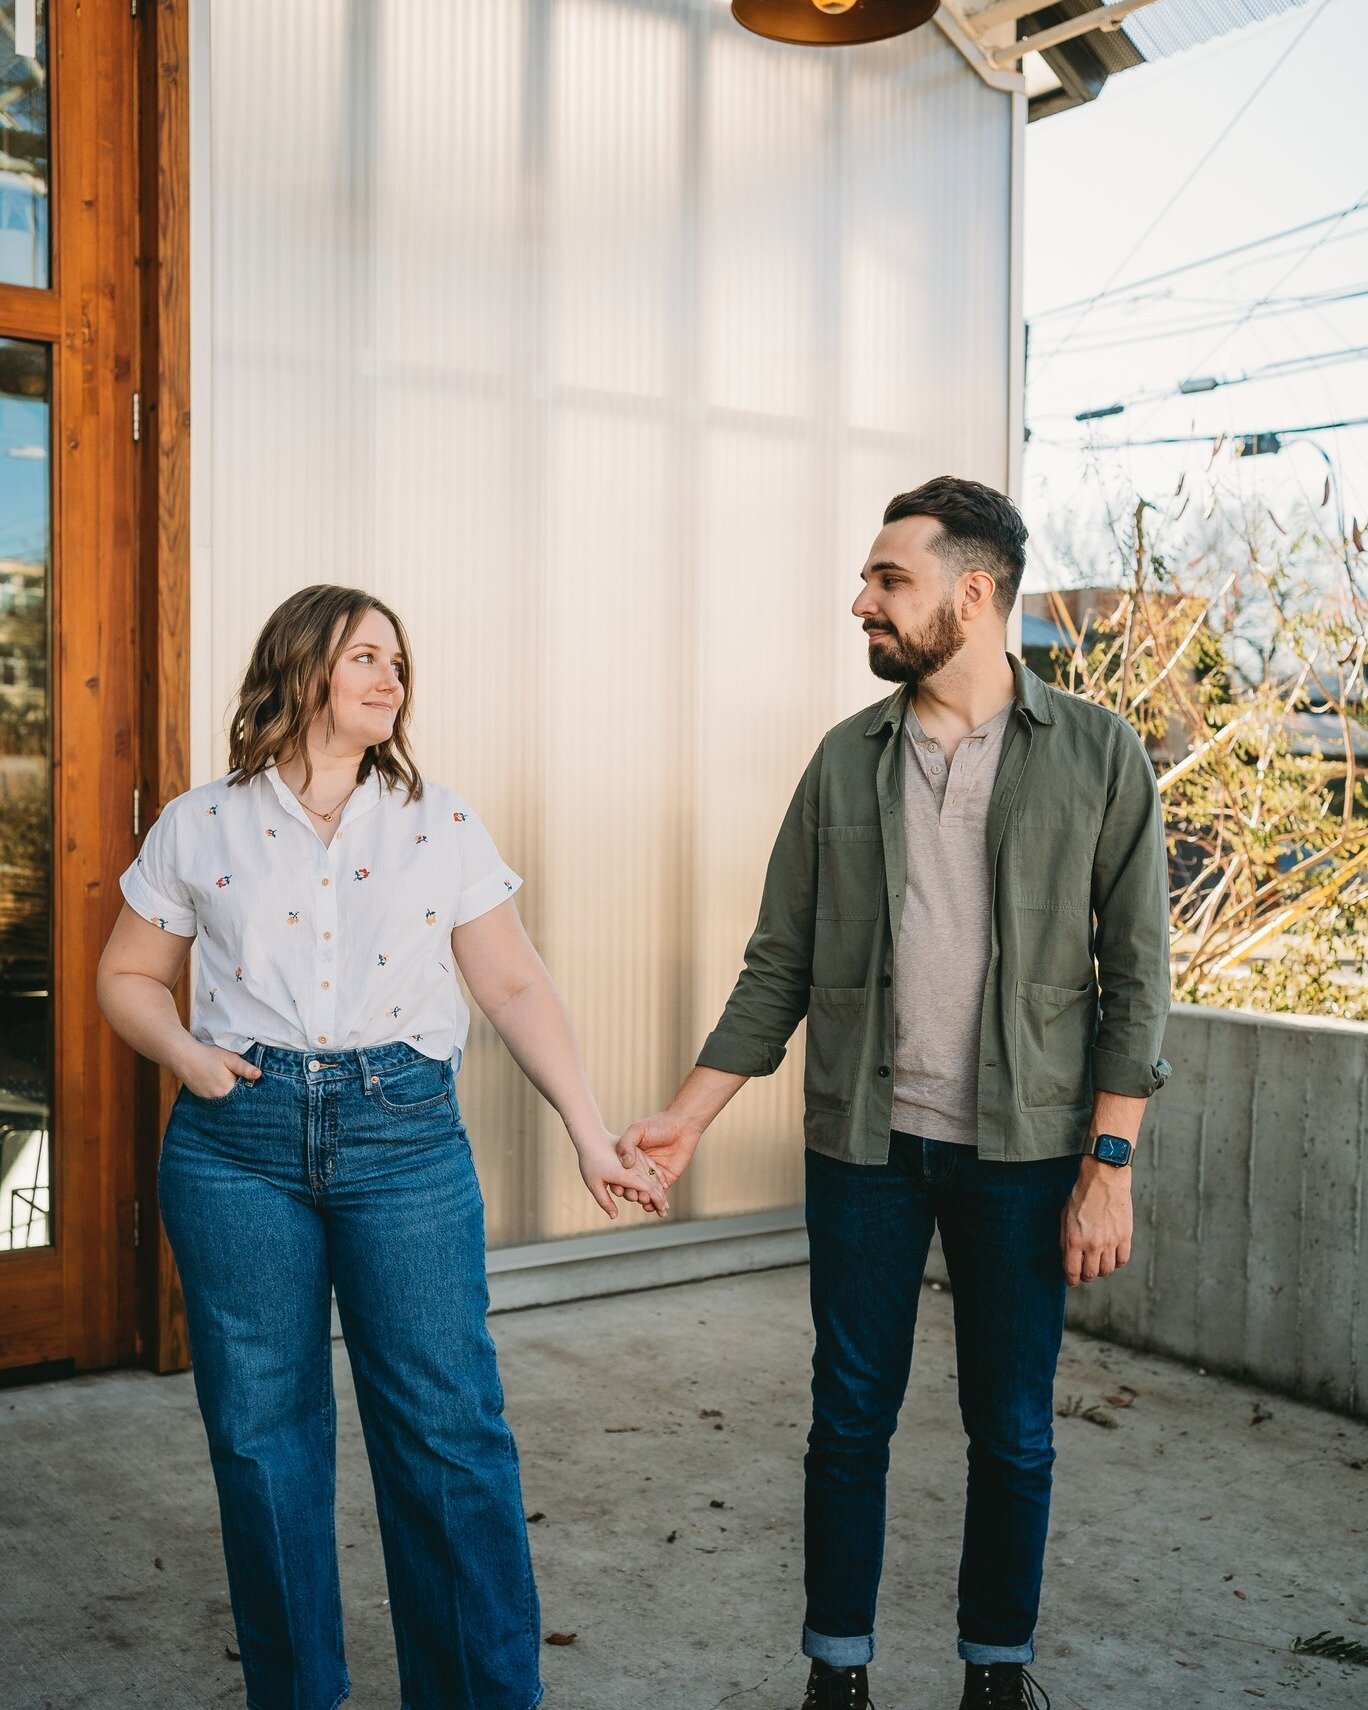 Spencer &amp; Hannah's engagement photos were so special because they were taken at a coffee shop they love. I think while I was editing these photos, something that stood out to me was the looks they gave each other. A look of love that is now docum